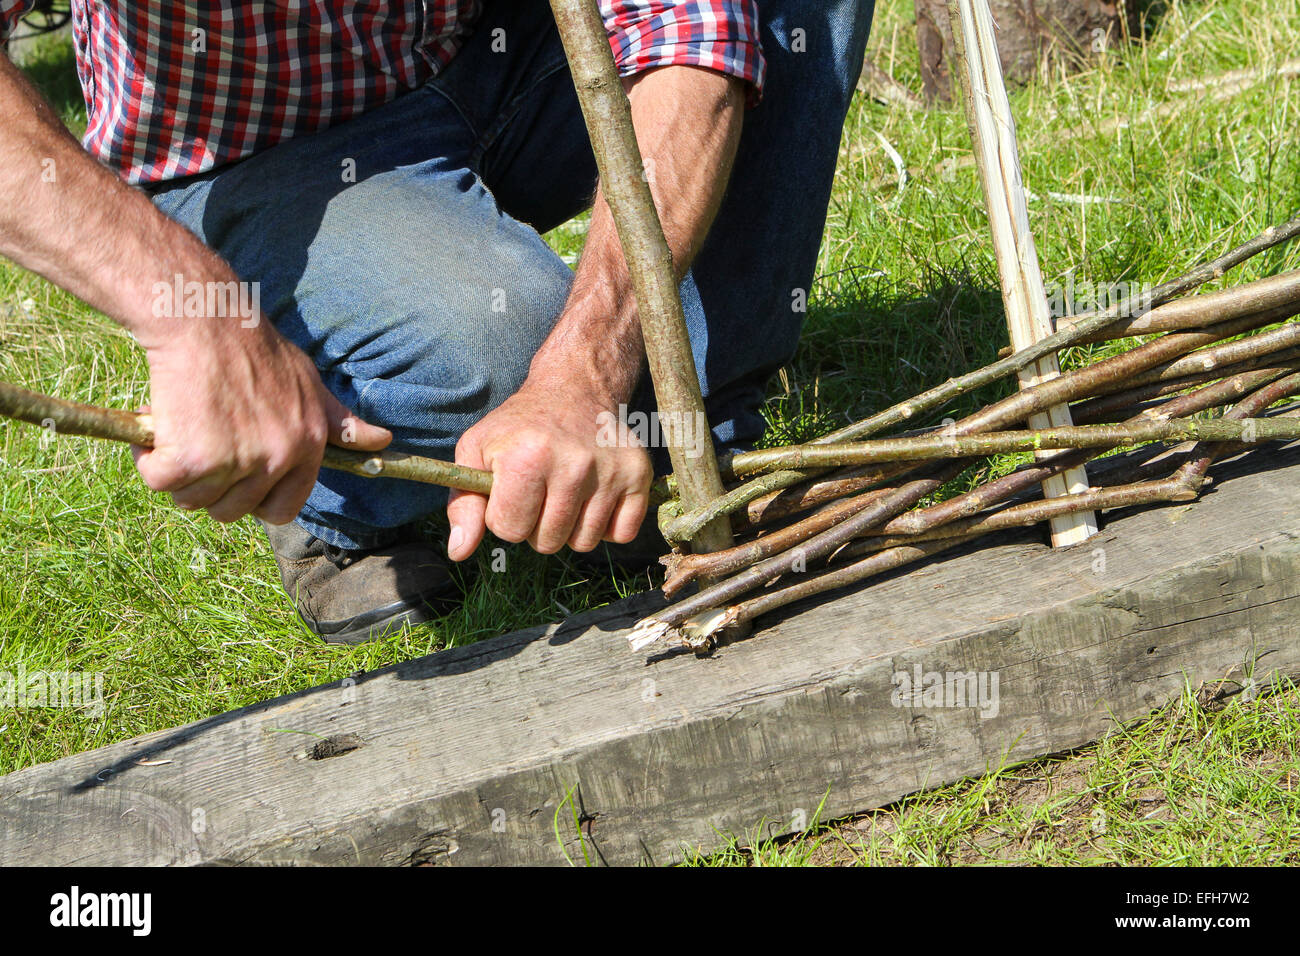 Craftsman demonstrating willow fence weaving at agricultural show, close up Stock Photo